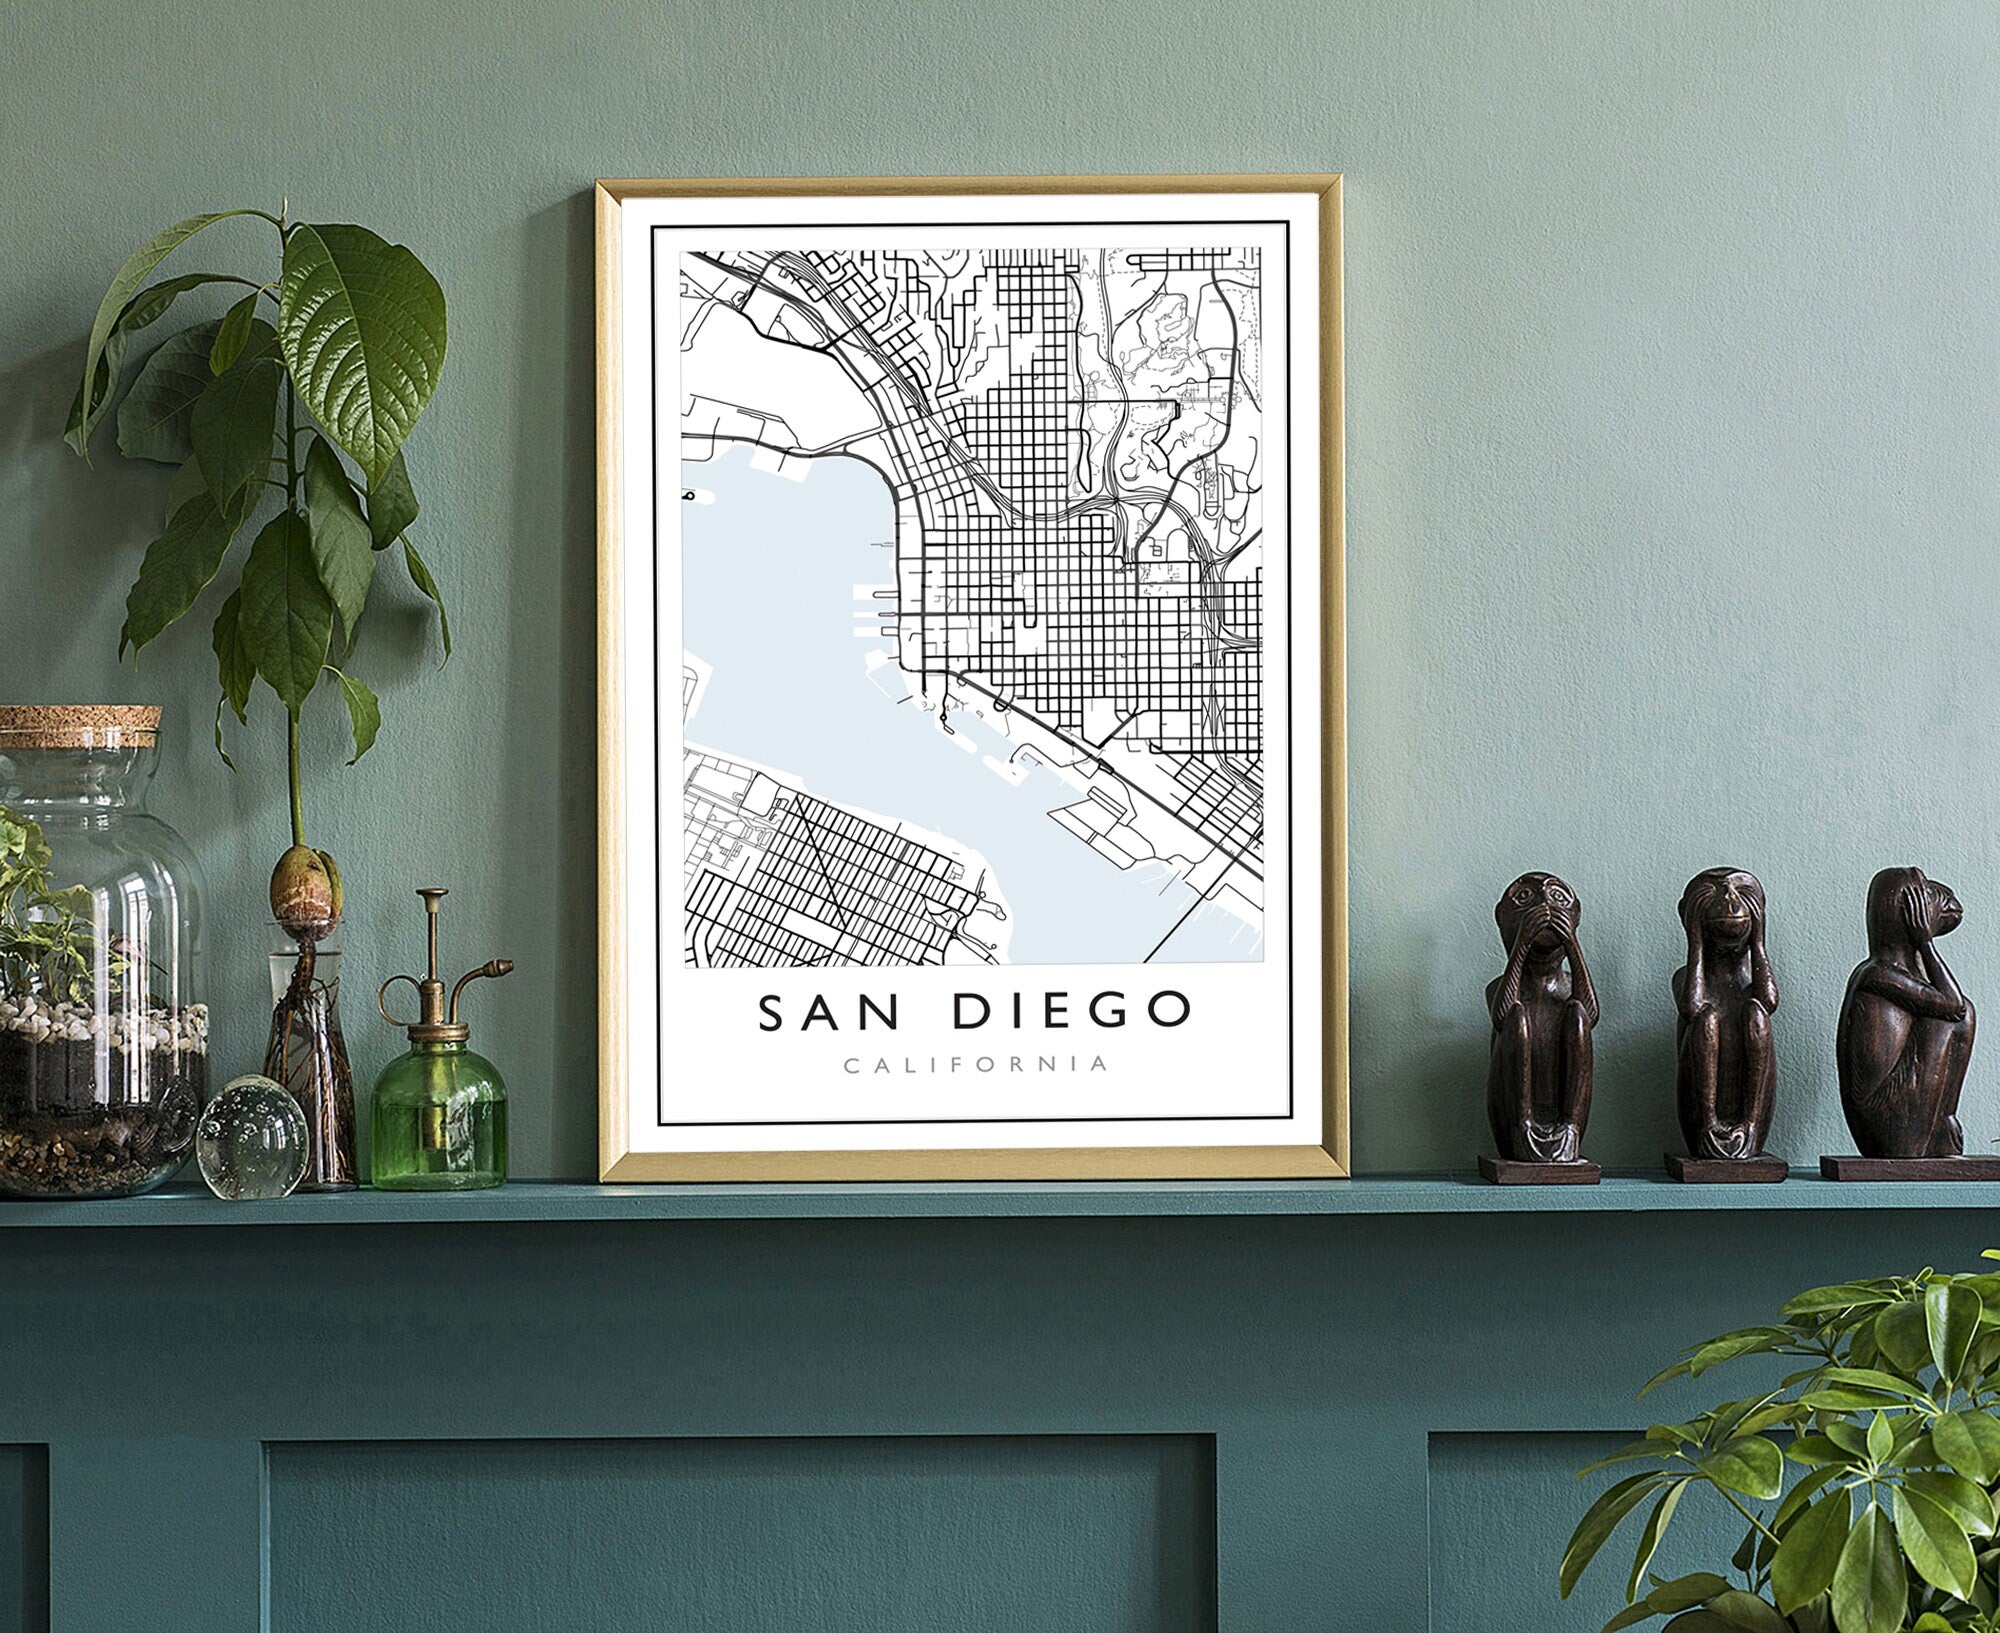 San Diego California City Map, San Diego Road Map Poster, City Street Map Print, US City Modern City Map, Home Office Wall Art Decoration